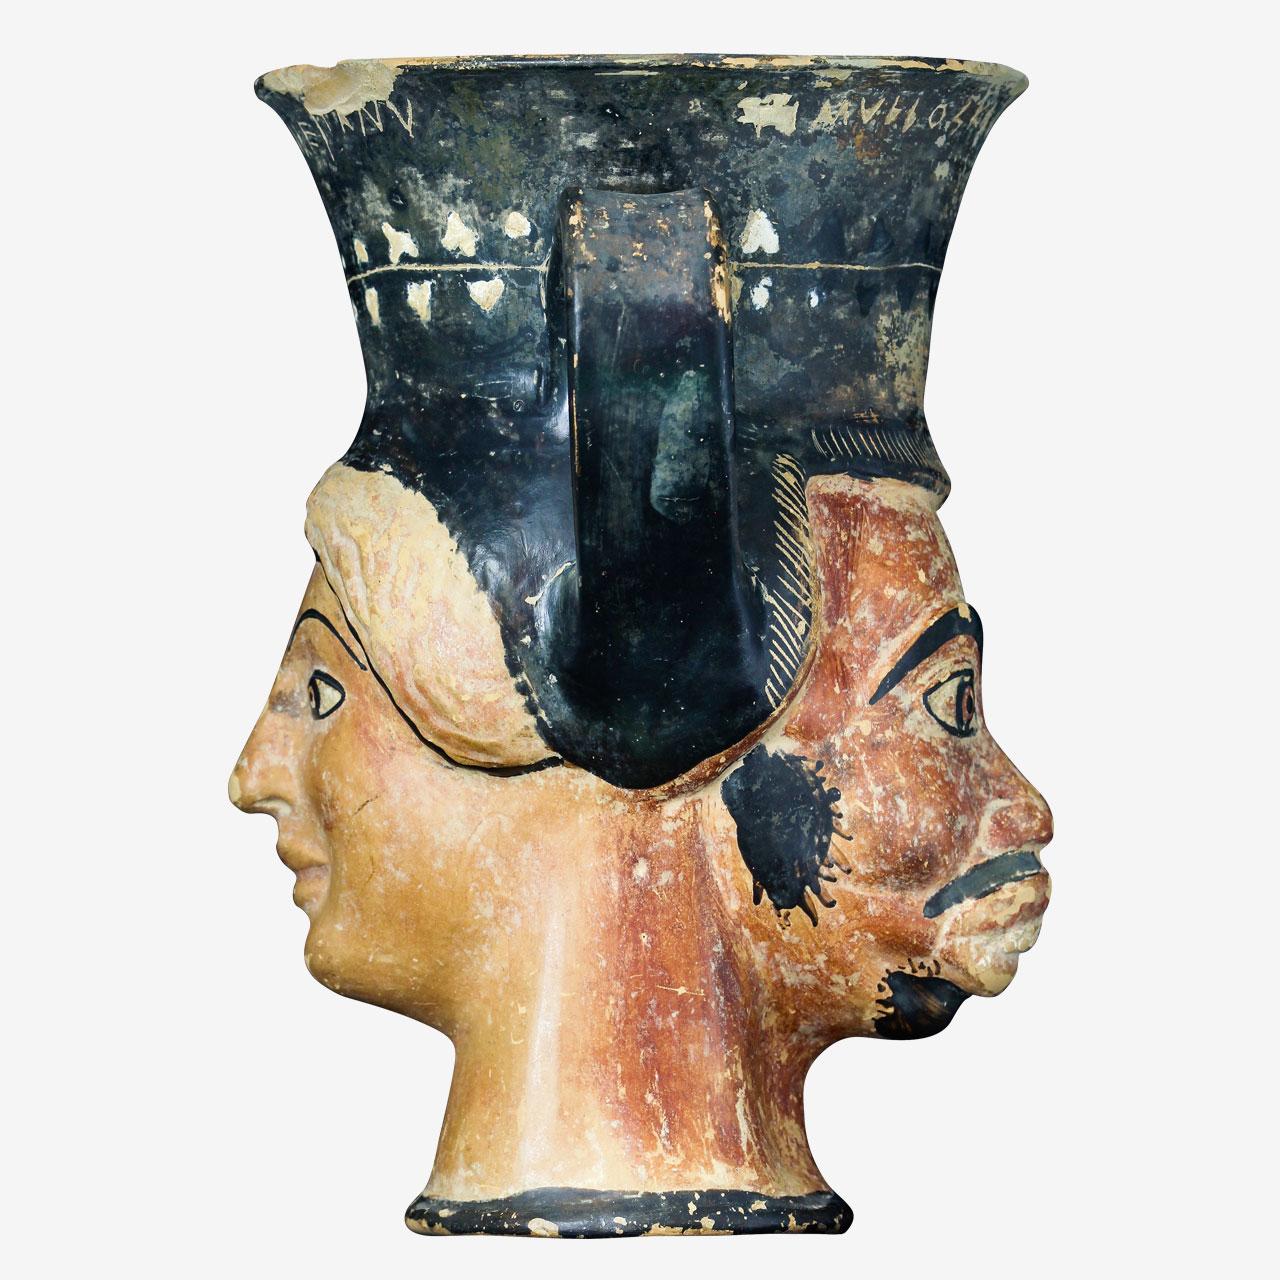 Clay Attic double-headed kantharos, attributed to the Syriskos Painter. Incised inscriptions above the two diametrically opposed modeled faces: “I am Eronassa, very beautiful”, and “I am Timyllos, as handsome as this face”.